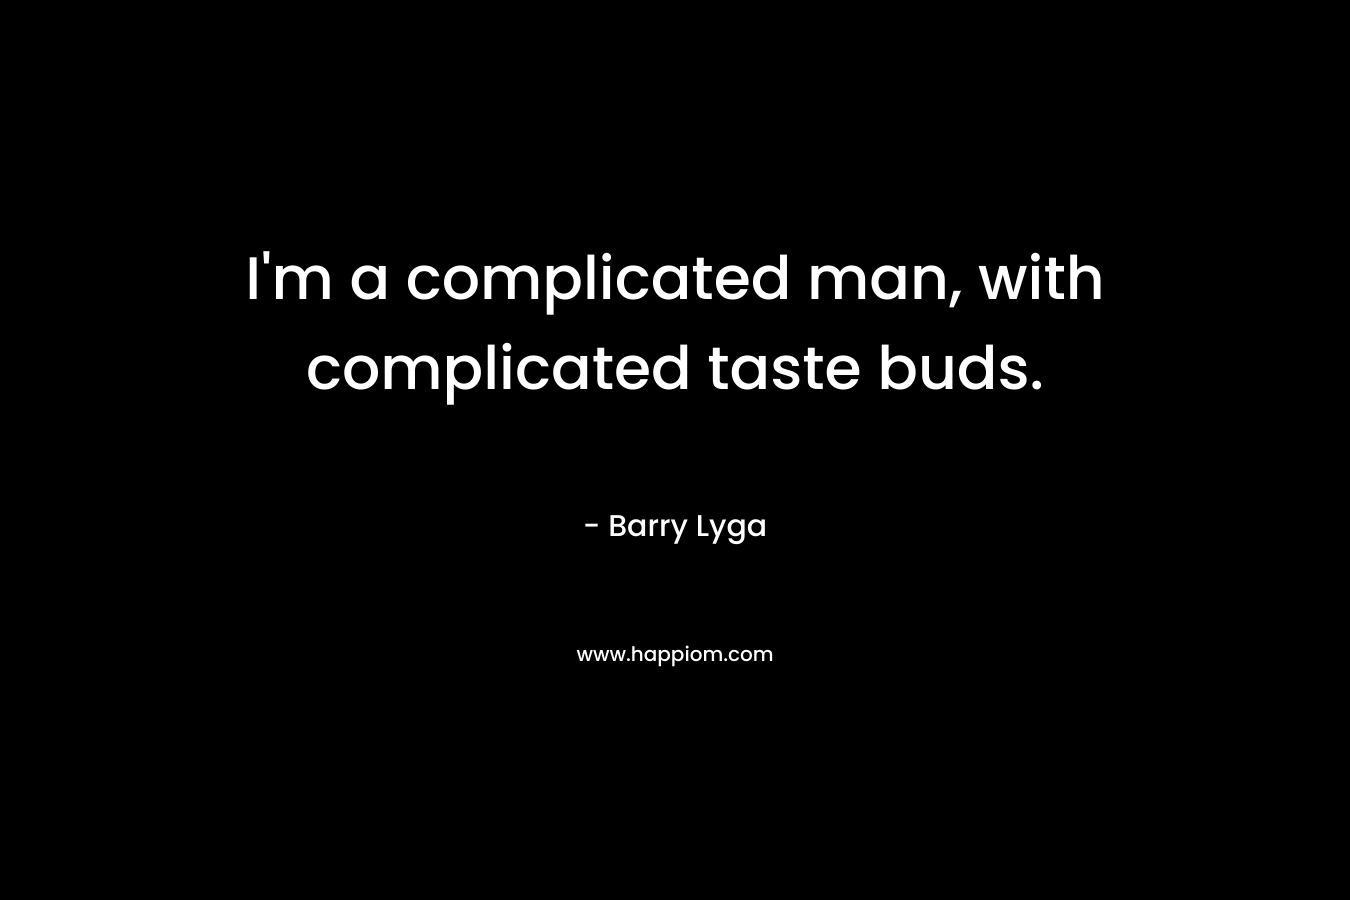 I'm a complicated man, with complicated taste buds.